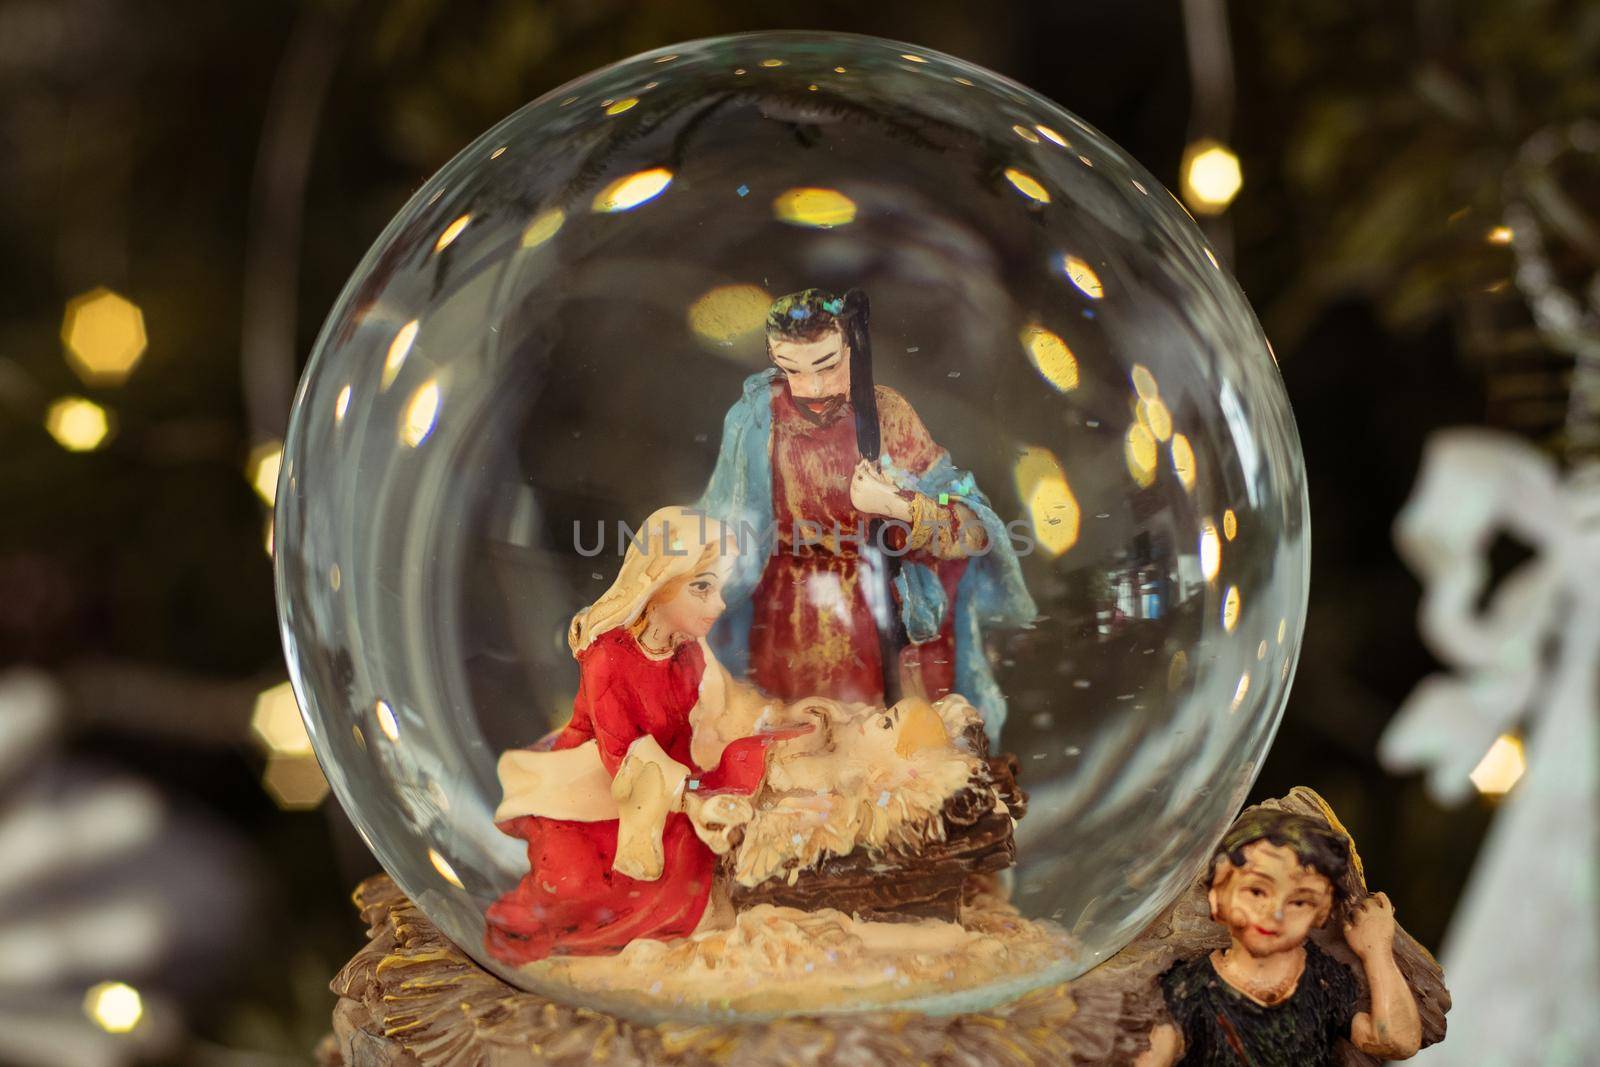 Scene of the birth of Jesus Christ in a glass ball on a Christmas tree by Godi